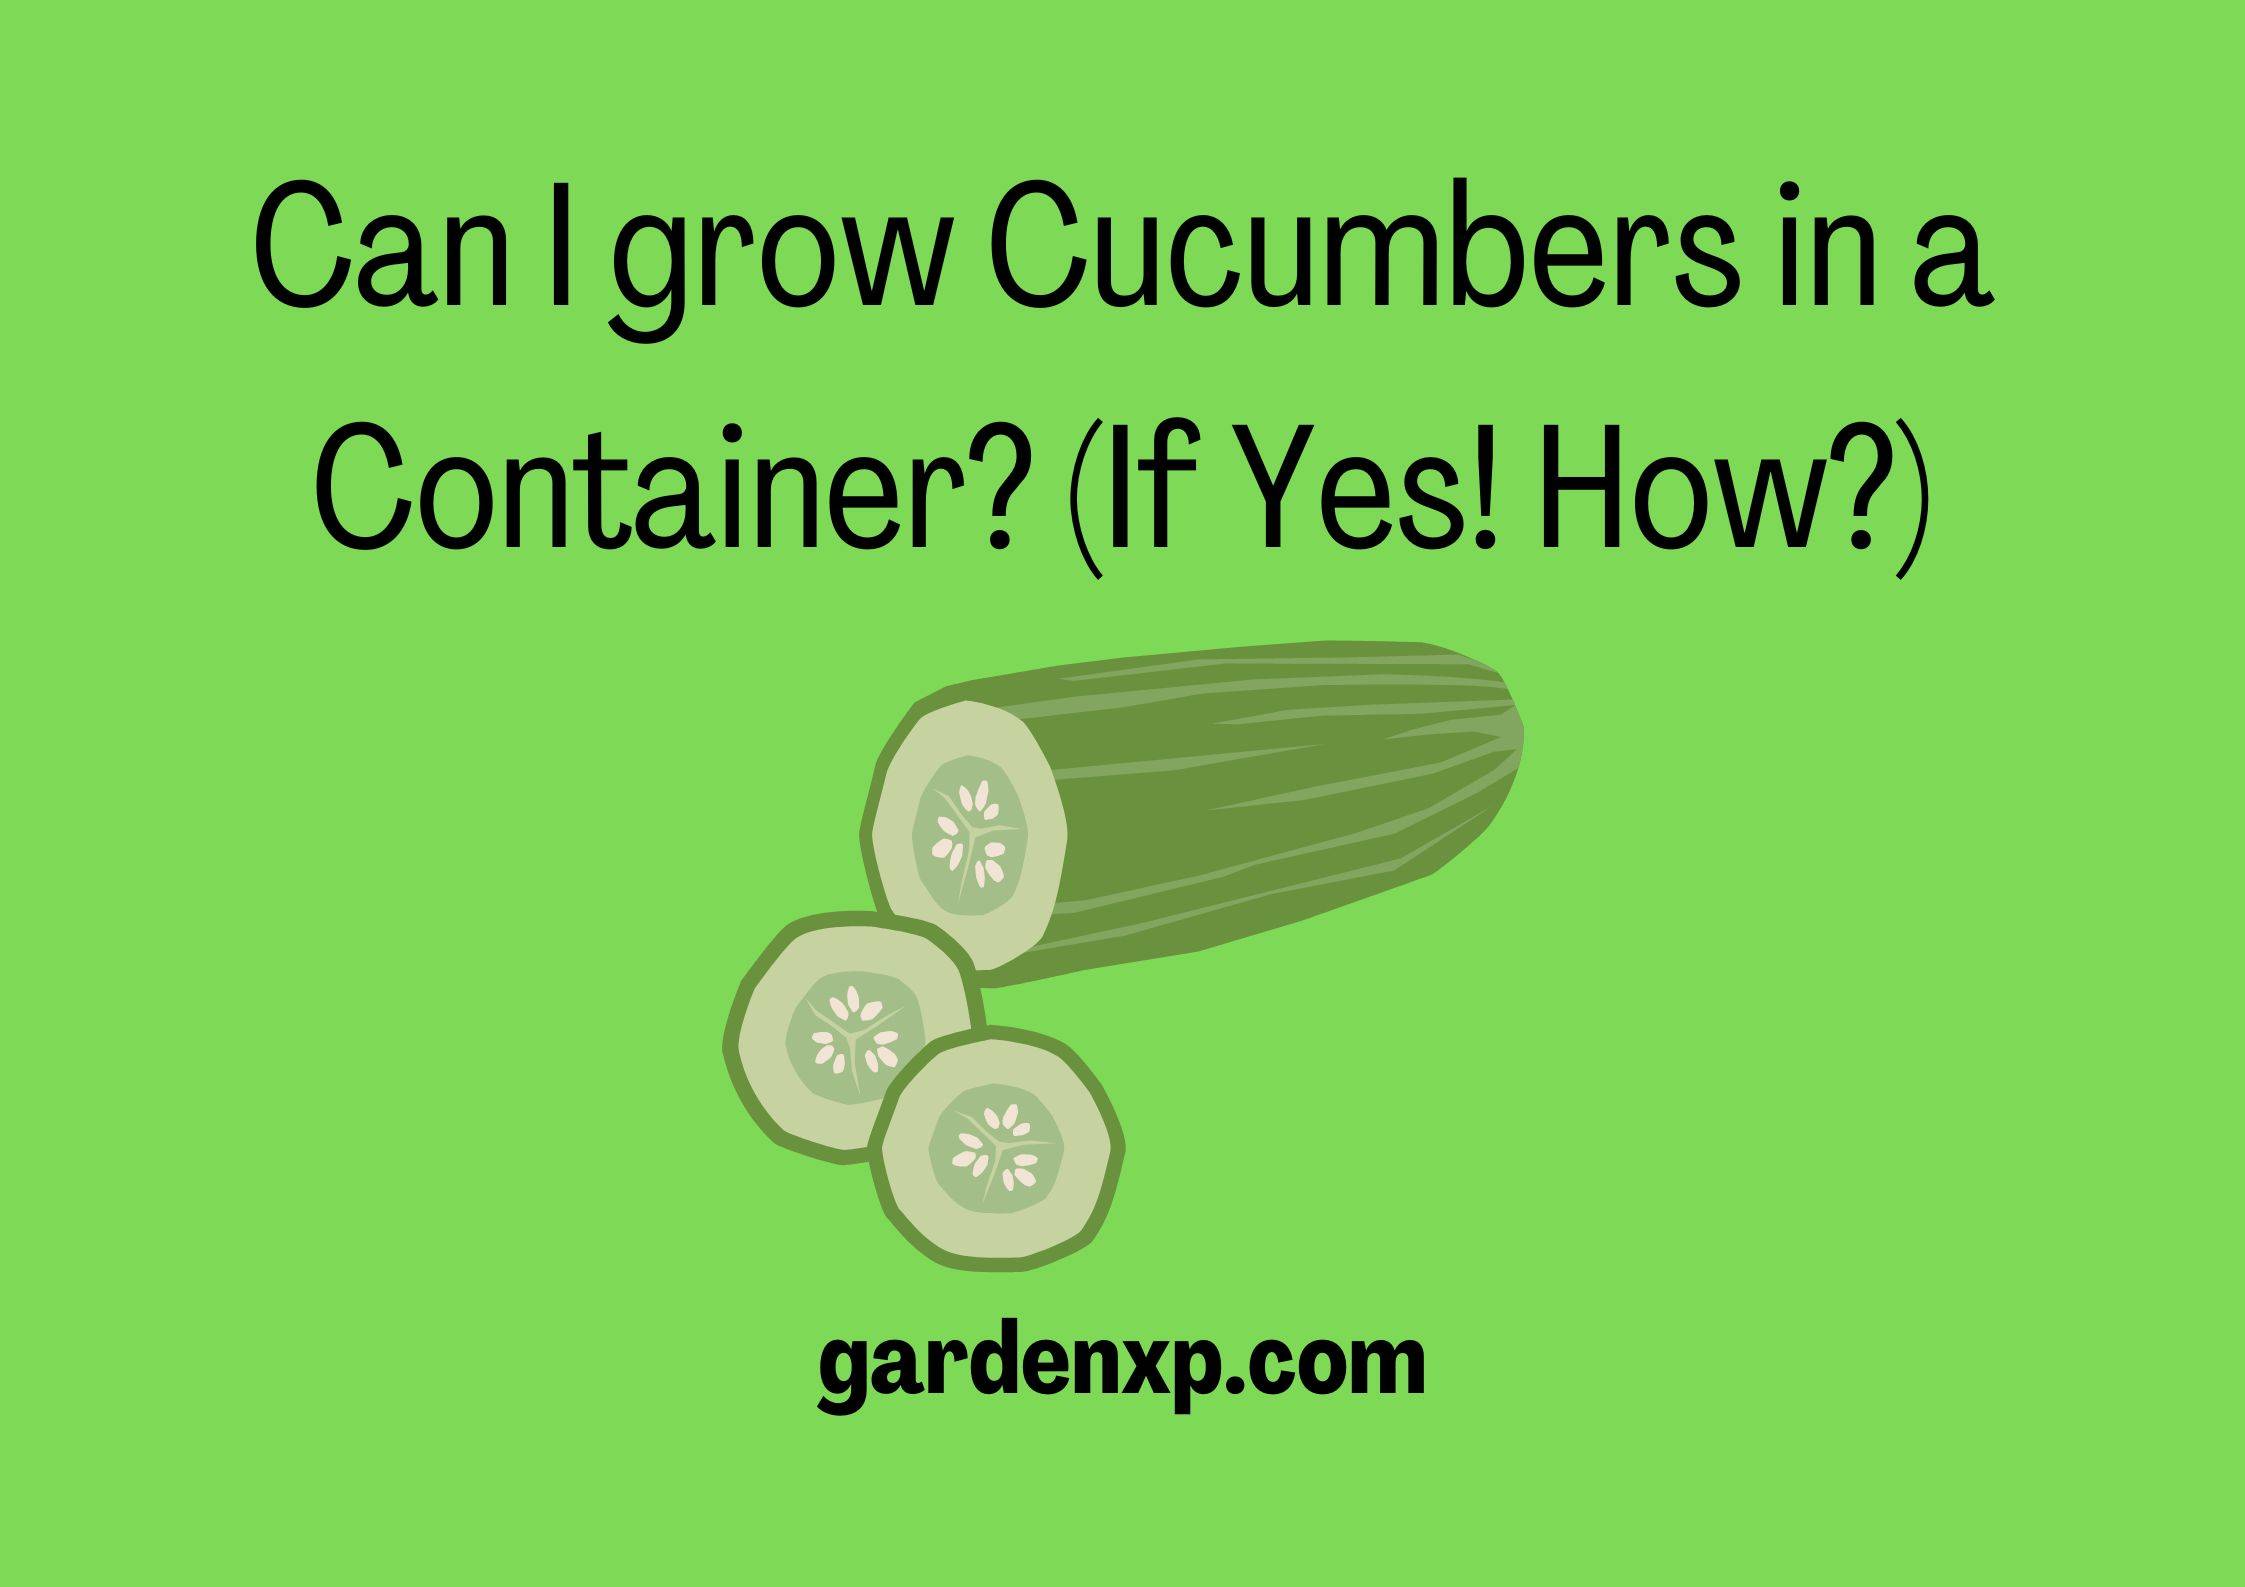 Can I grow Cucumbers in a Container? (If Yes! How?)